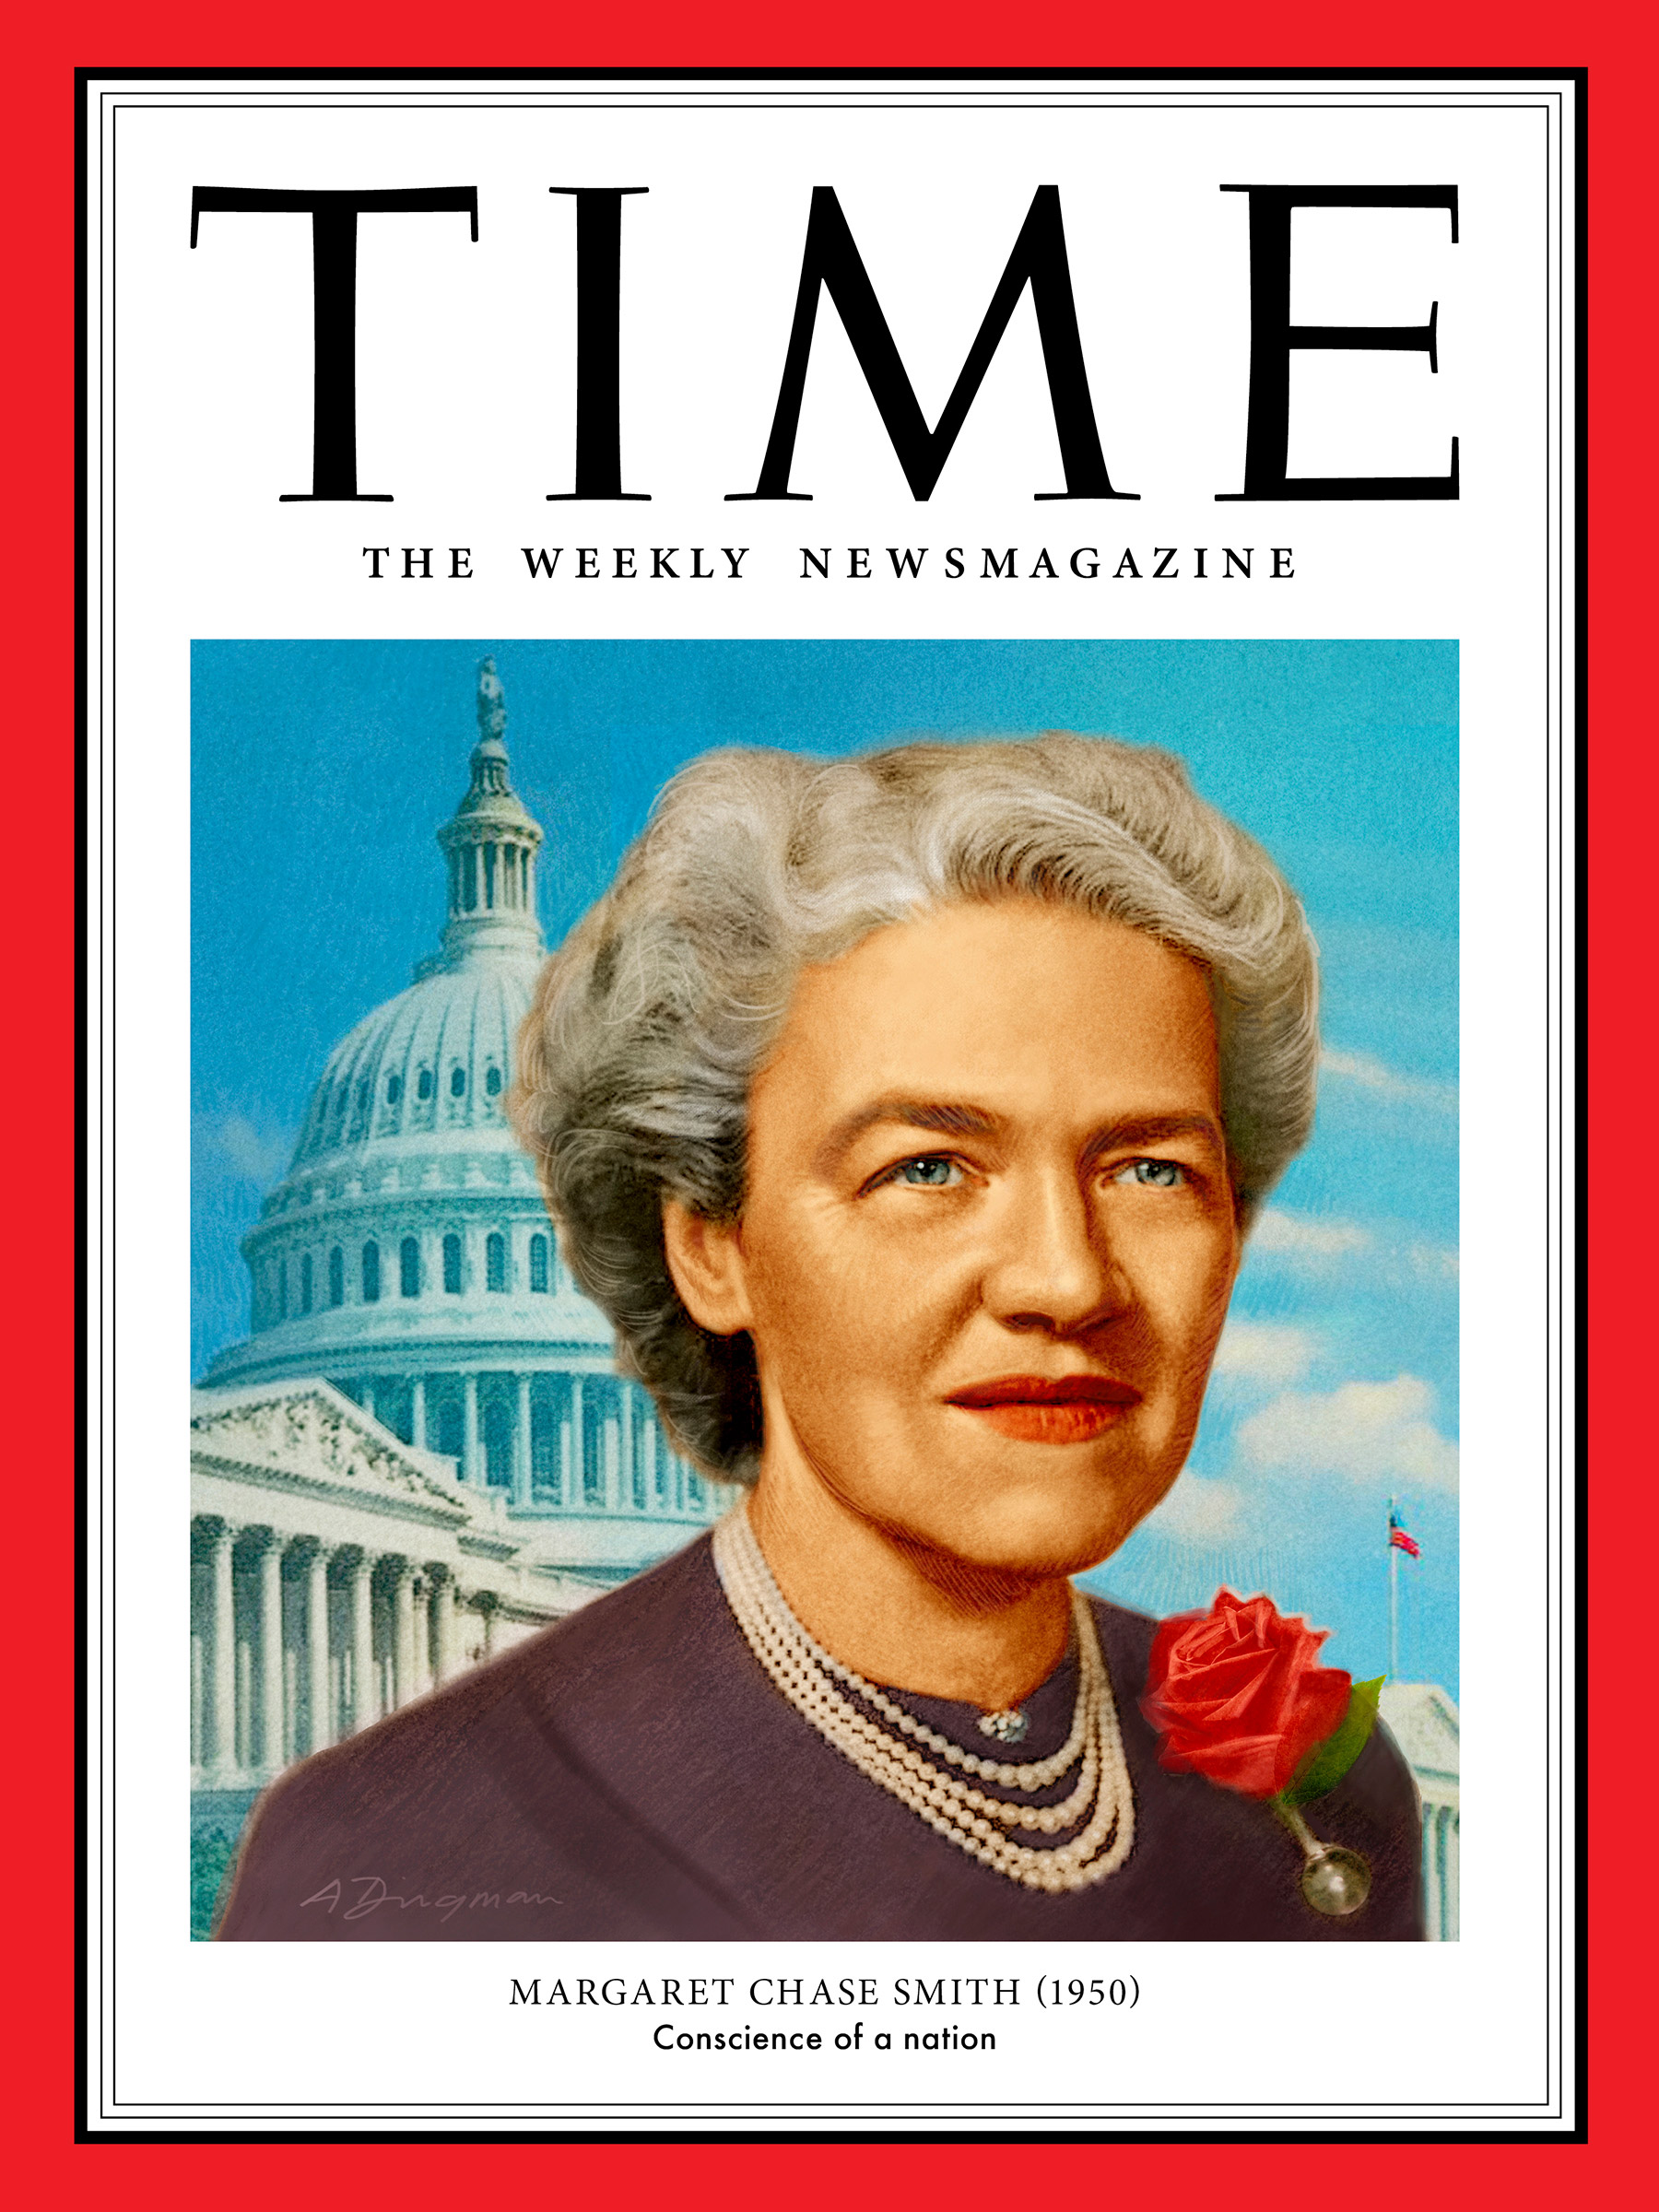 Women of the Year: 1950 Margaret Chase Smith